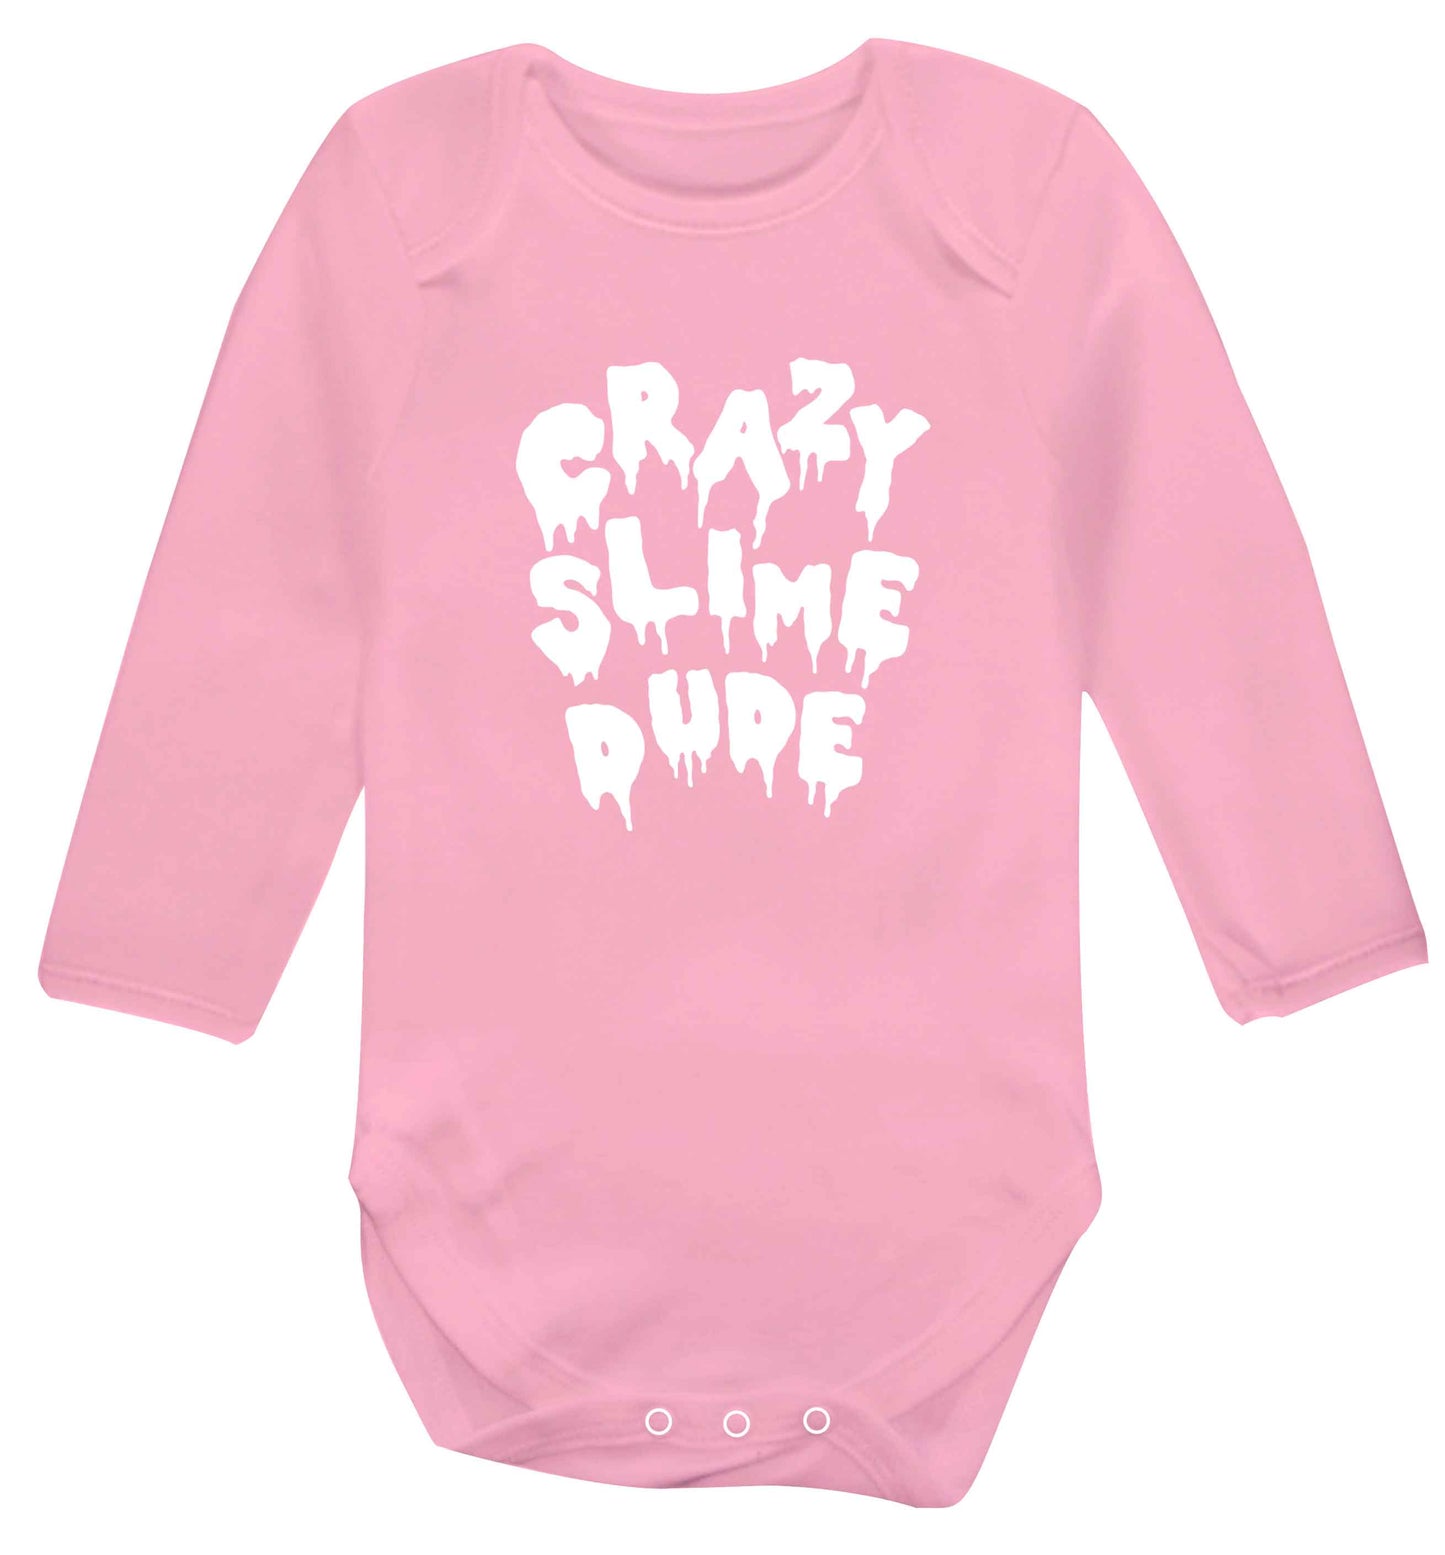 Crazy slime dude baby vest long sleeved pale pink 6-12 months